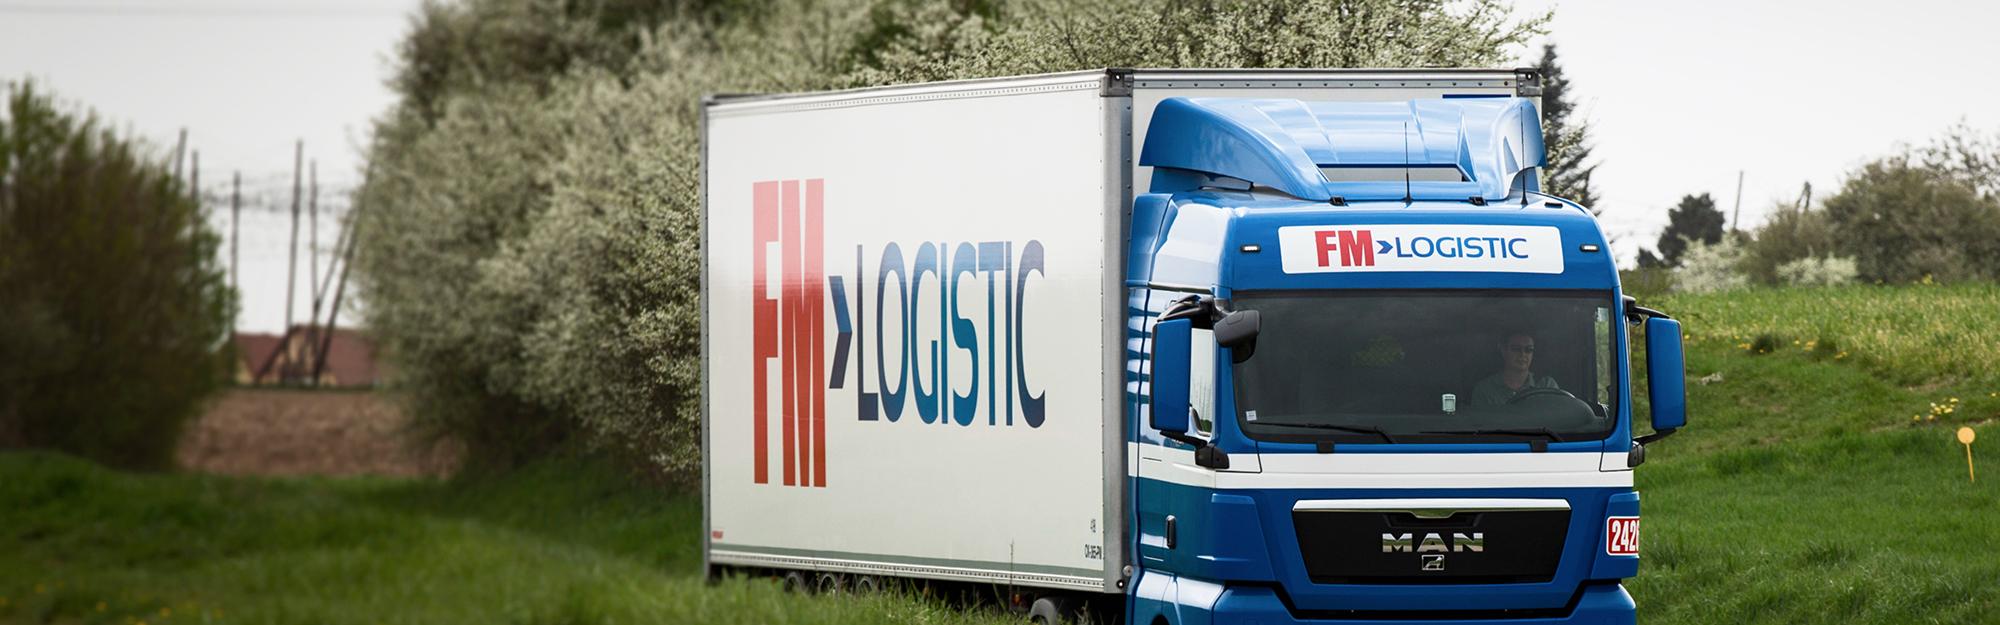 Product Transport Solutions & Services - FM Logistic Italy image